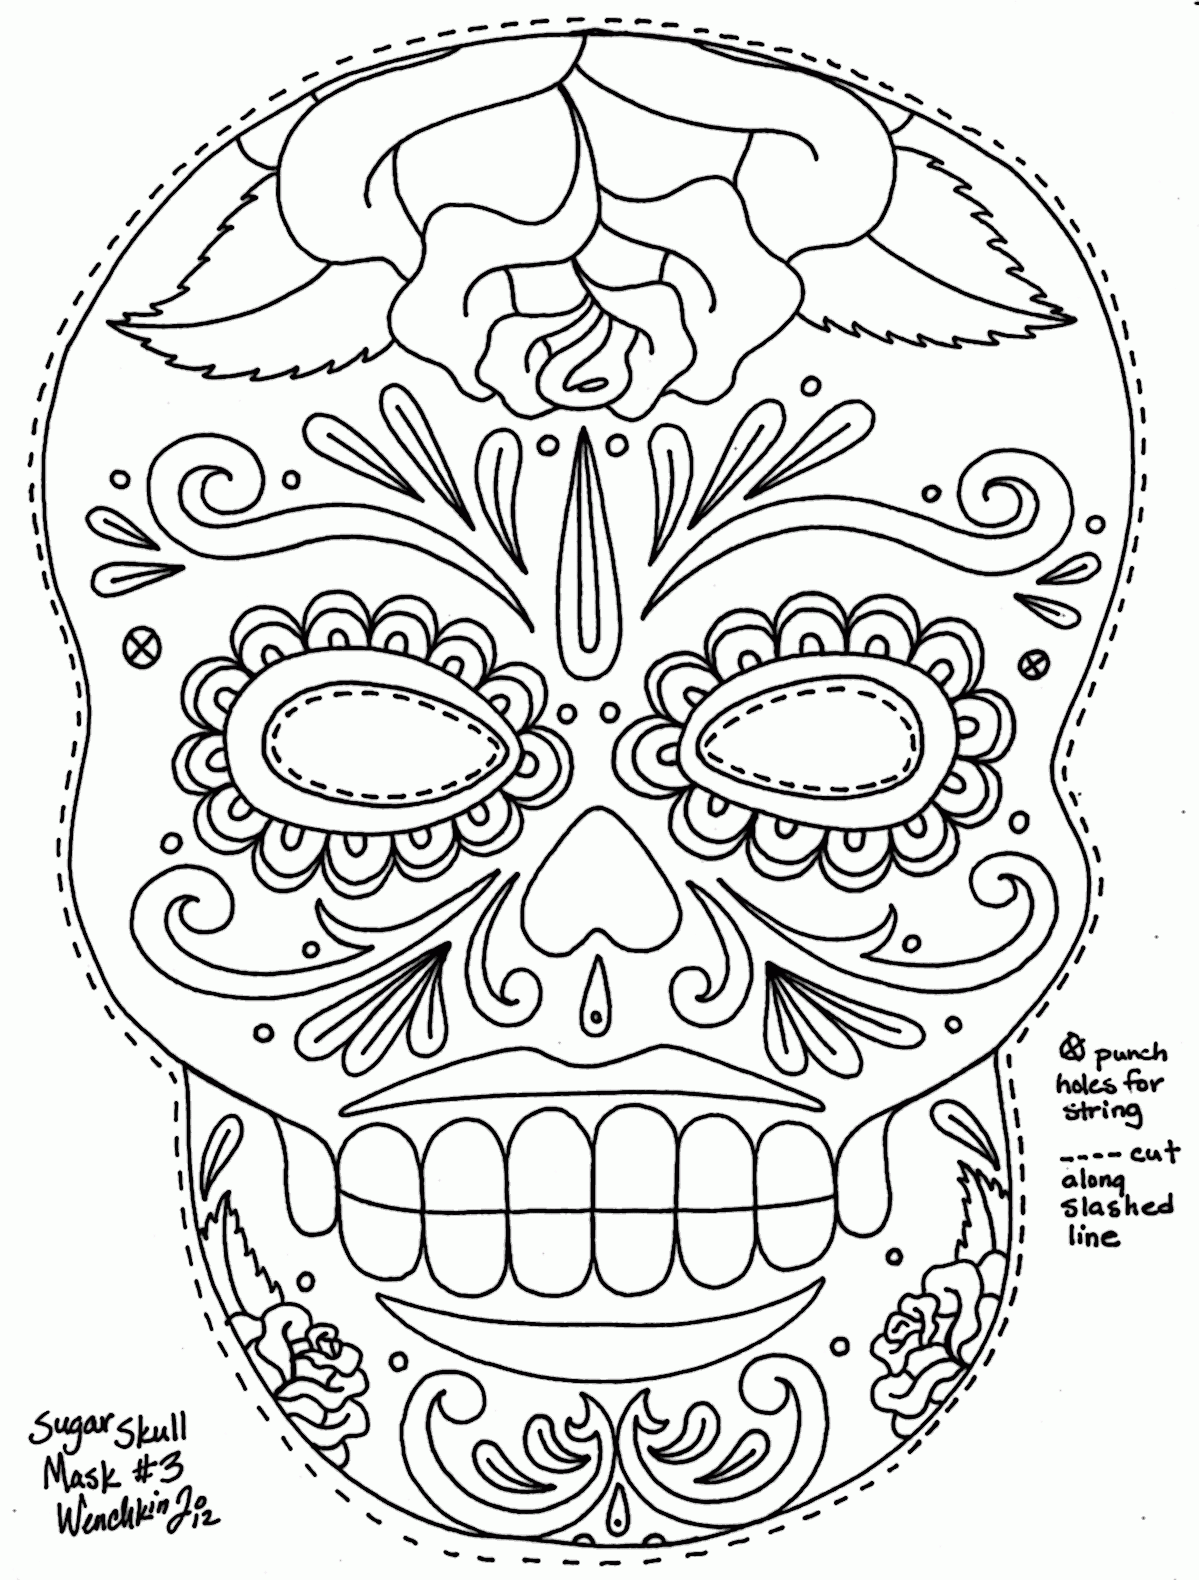 Detailed Coloring Pages For Adults Skull | Coloring Online